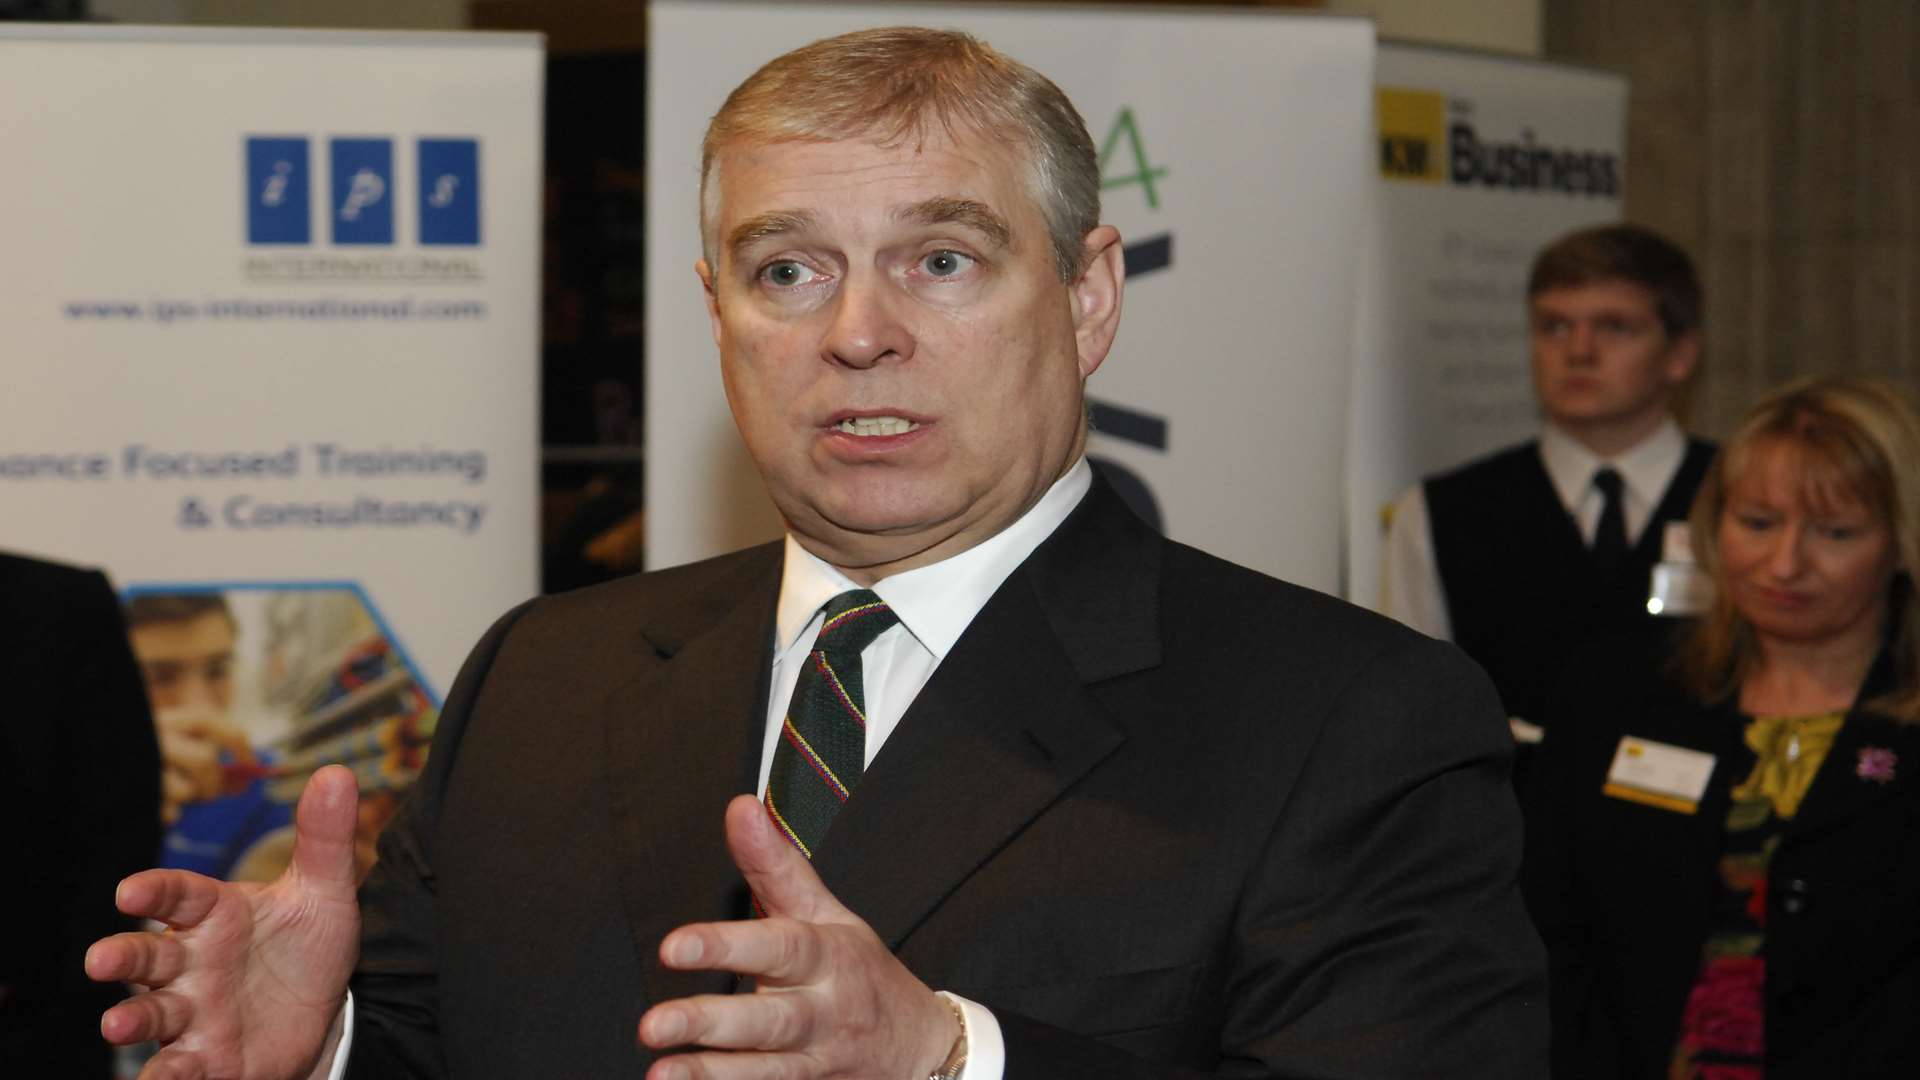 HRH the Duke of York has tweeted his support